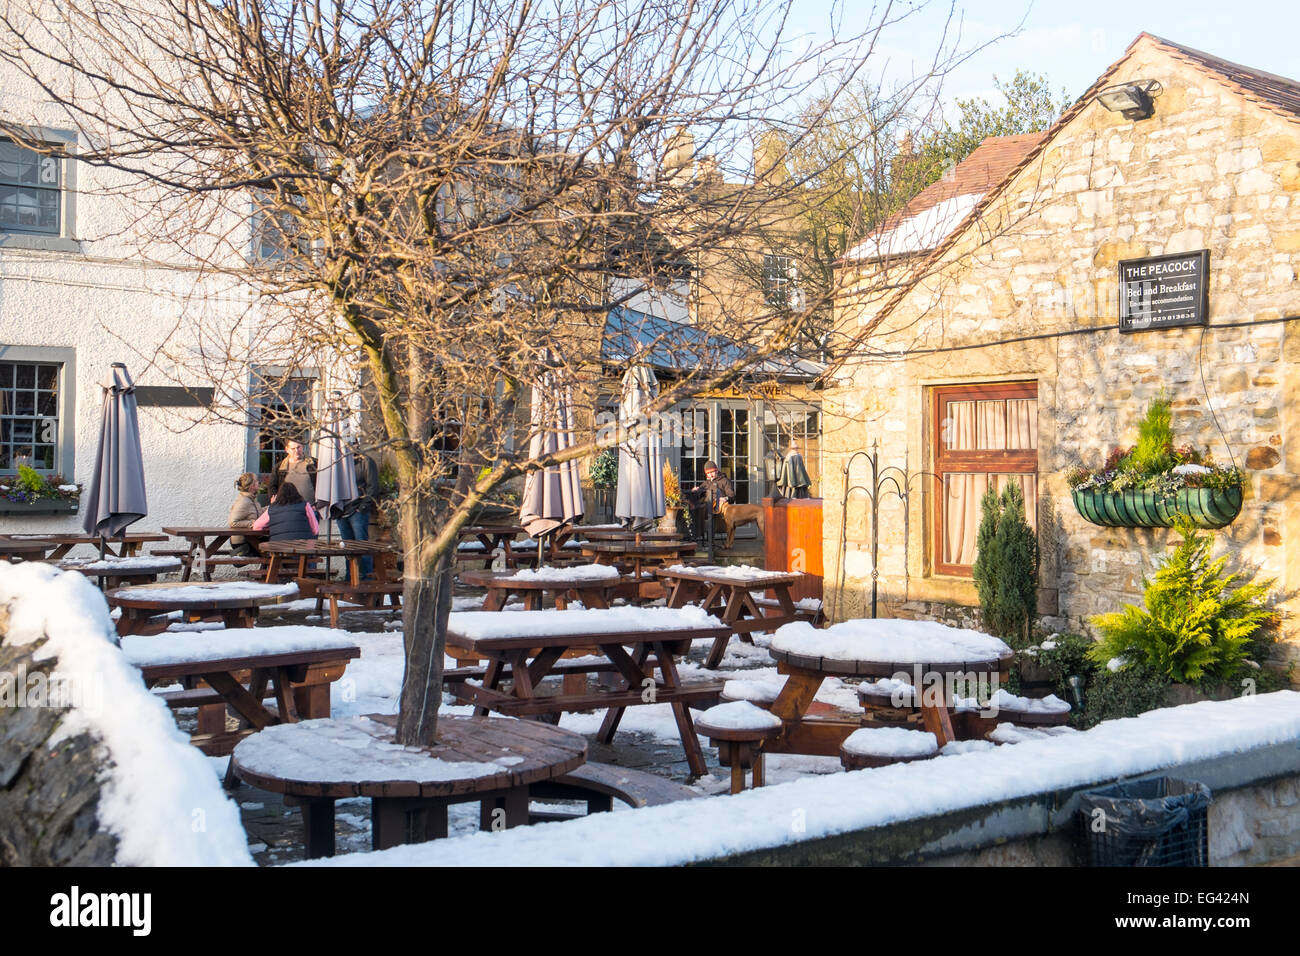 Peacock inn and hotel in the market town of Bakewell, Derbyshire Peak District,England on a snowy winters day Stock Photo